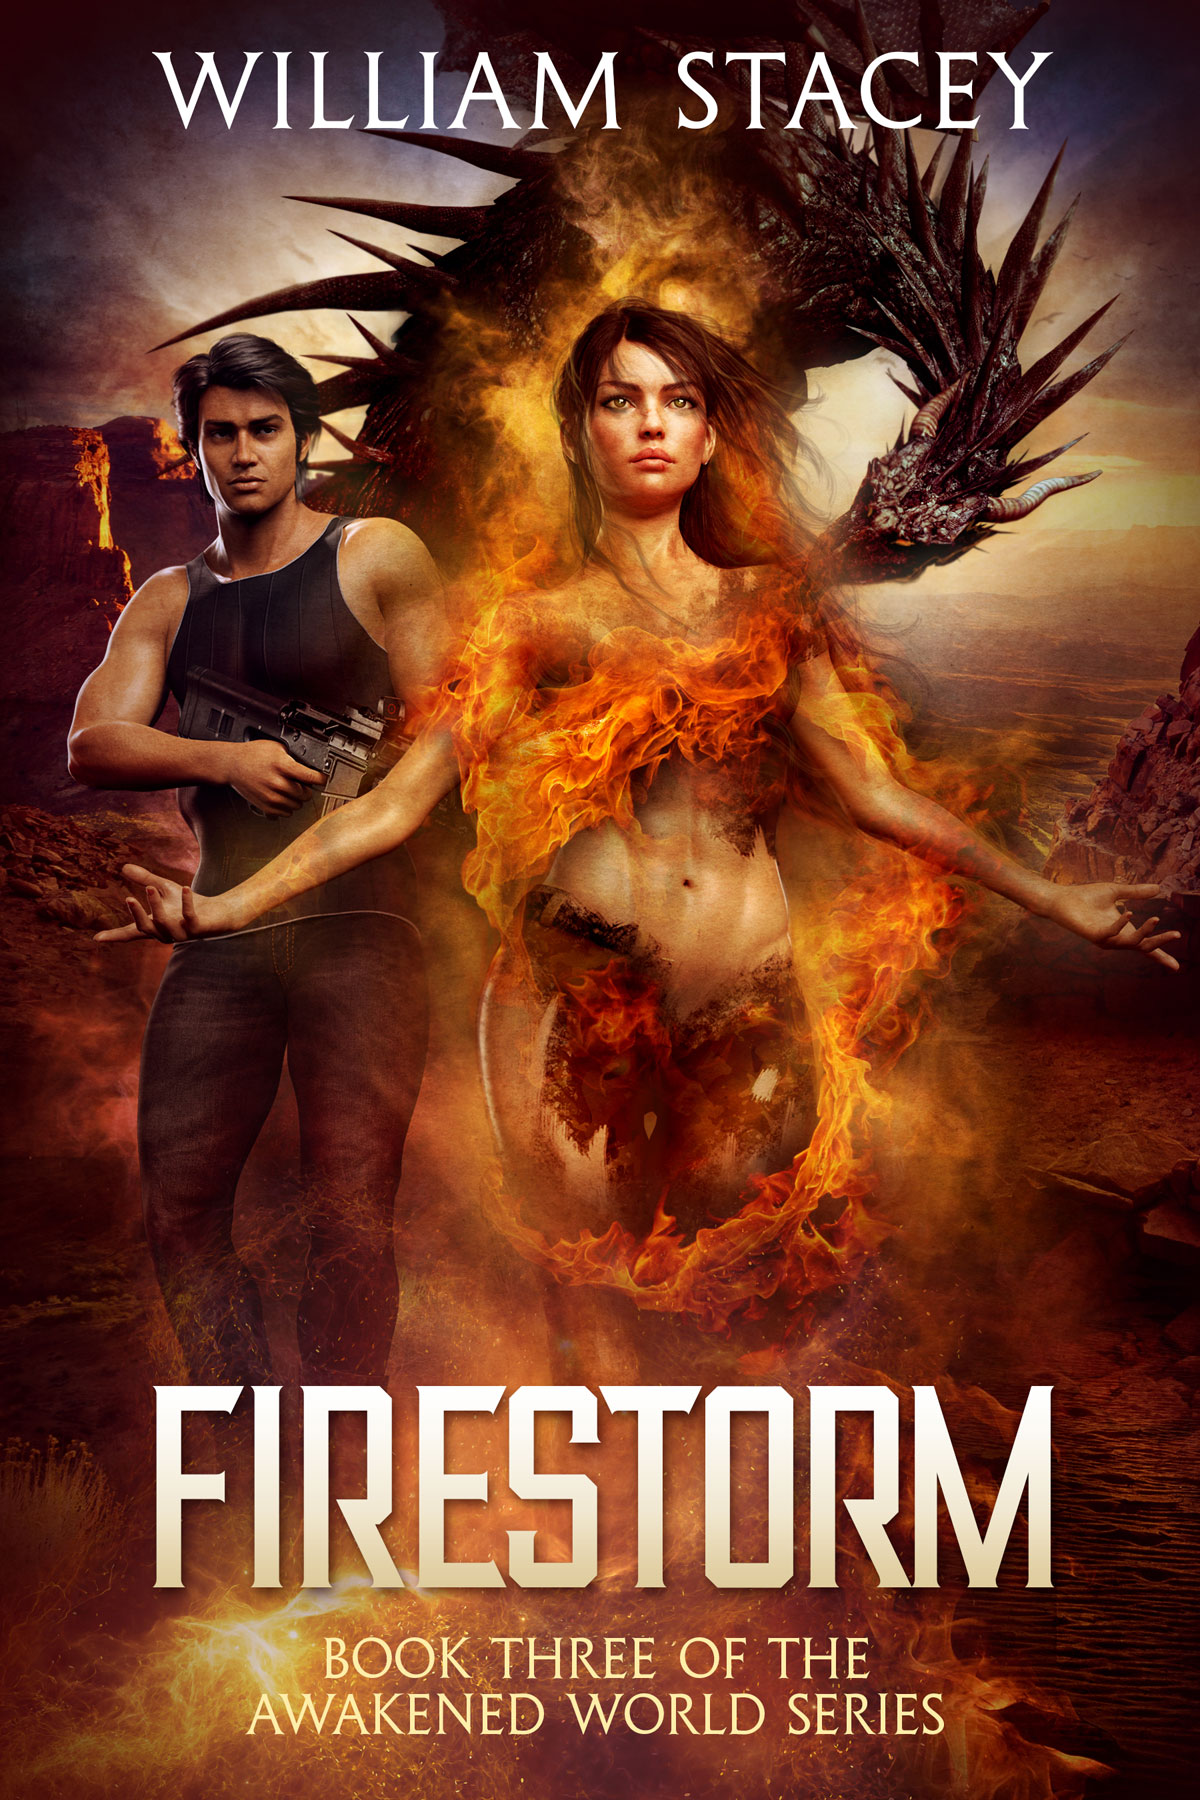 Firestorm, Book 3 of The Awakened World by William Stacey